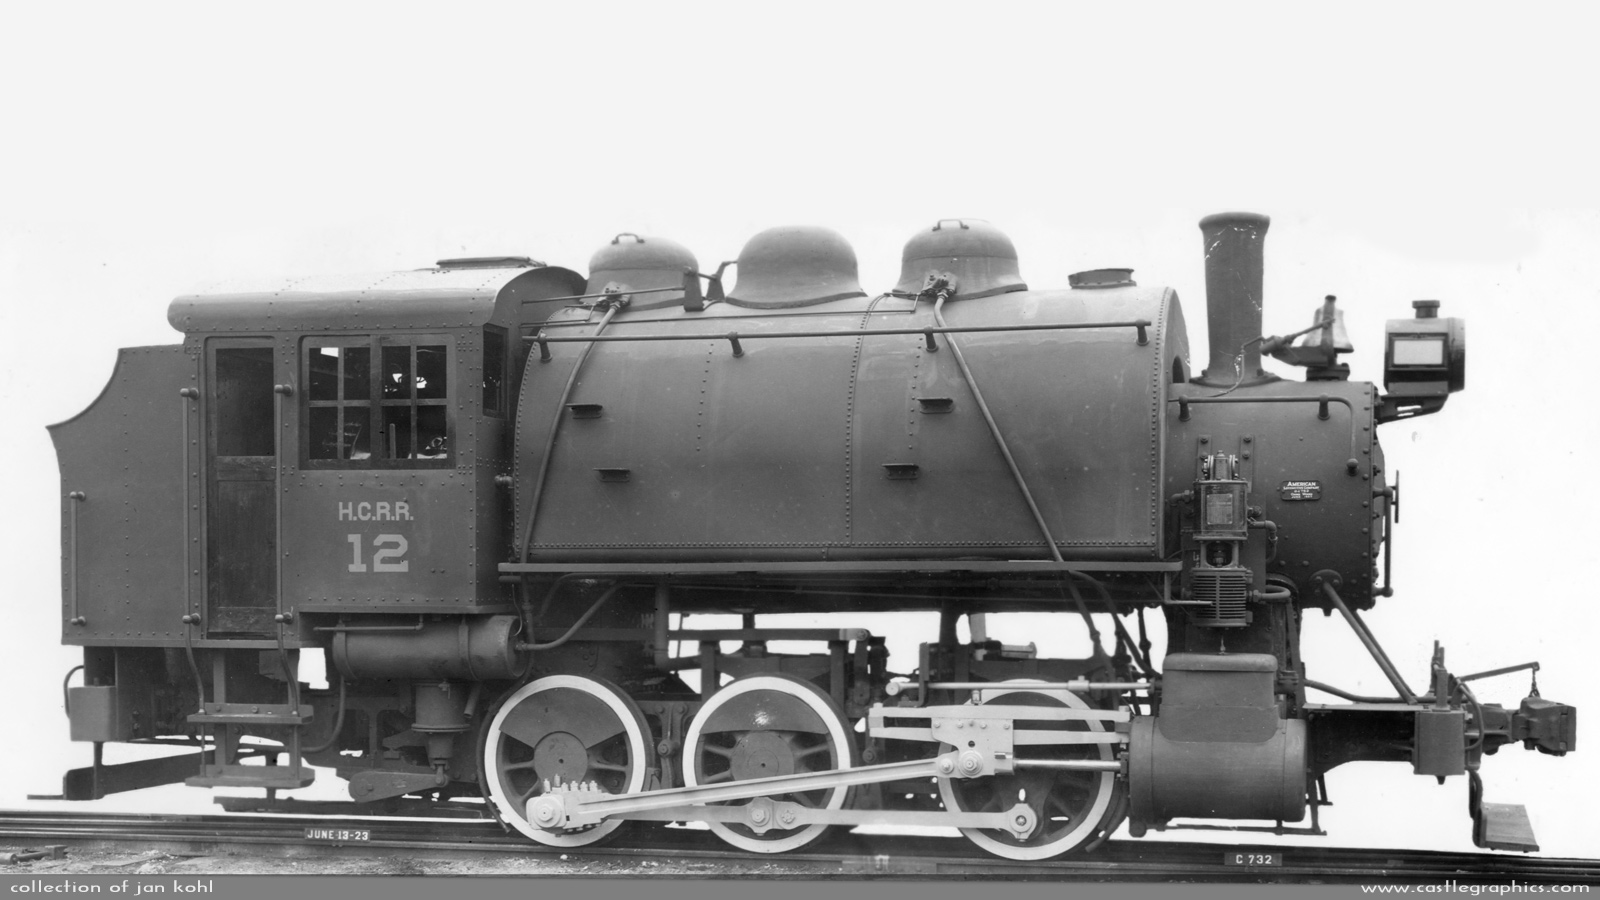 Hannibal Connecting Railroad tank engine builder's photo
HCRR #12 as it appears the builder's photo in 1923, when it was built new at the American Locomotive Company.  It had a tractive effort of 24200 lbs.
